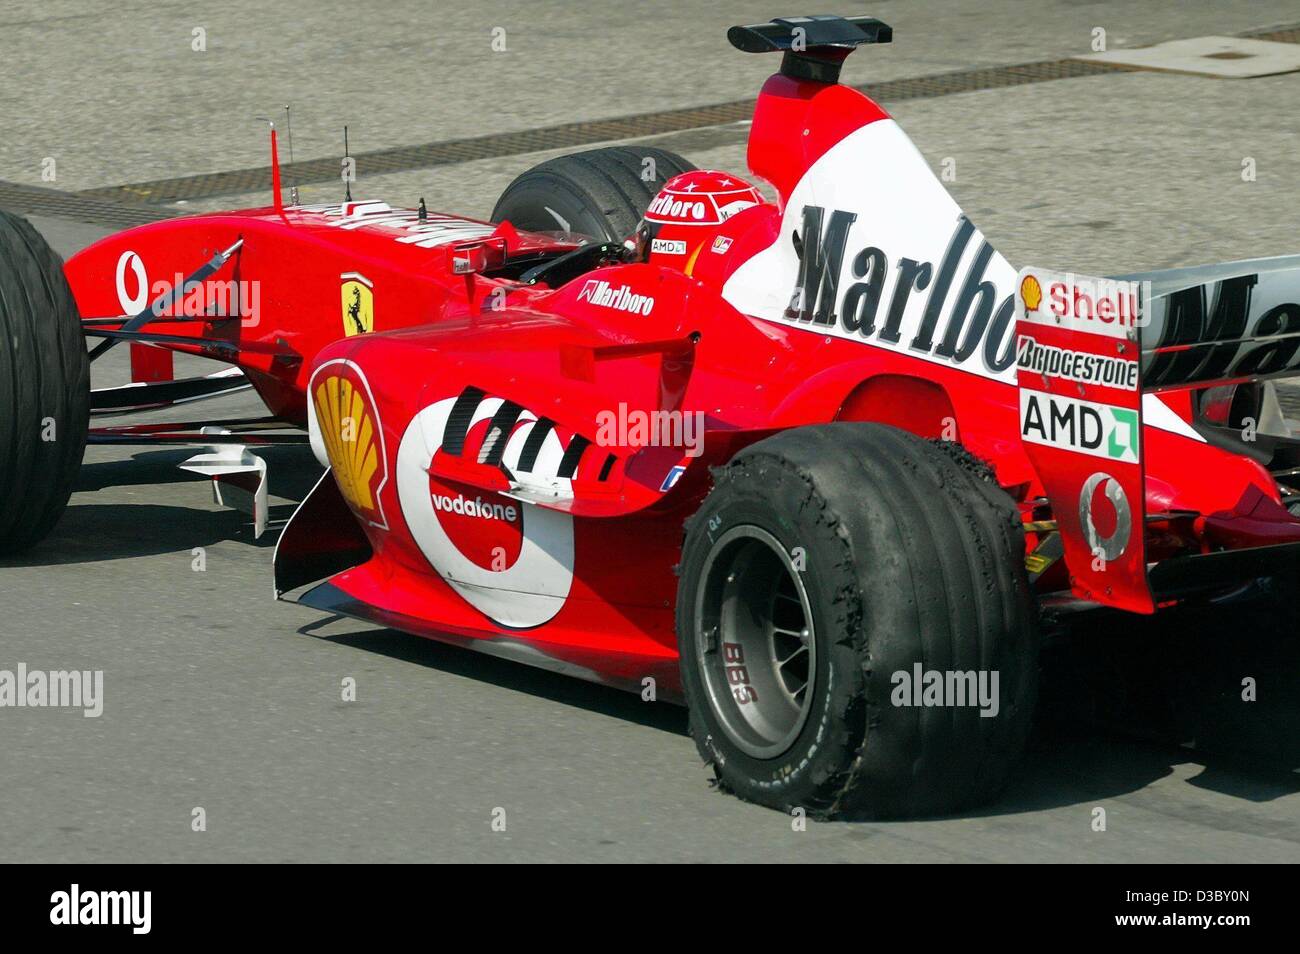 (dpa) - German formula one champion Michael Schumacher of Ferrari drives into the pitline with a burst tyre four laps before the end of the race, during the German Grand Prix at the Hockenheim race track in Hockenheim, Germany, 3 August 2003. Schumacher finished seventh place. Stock Photo